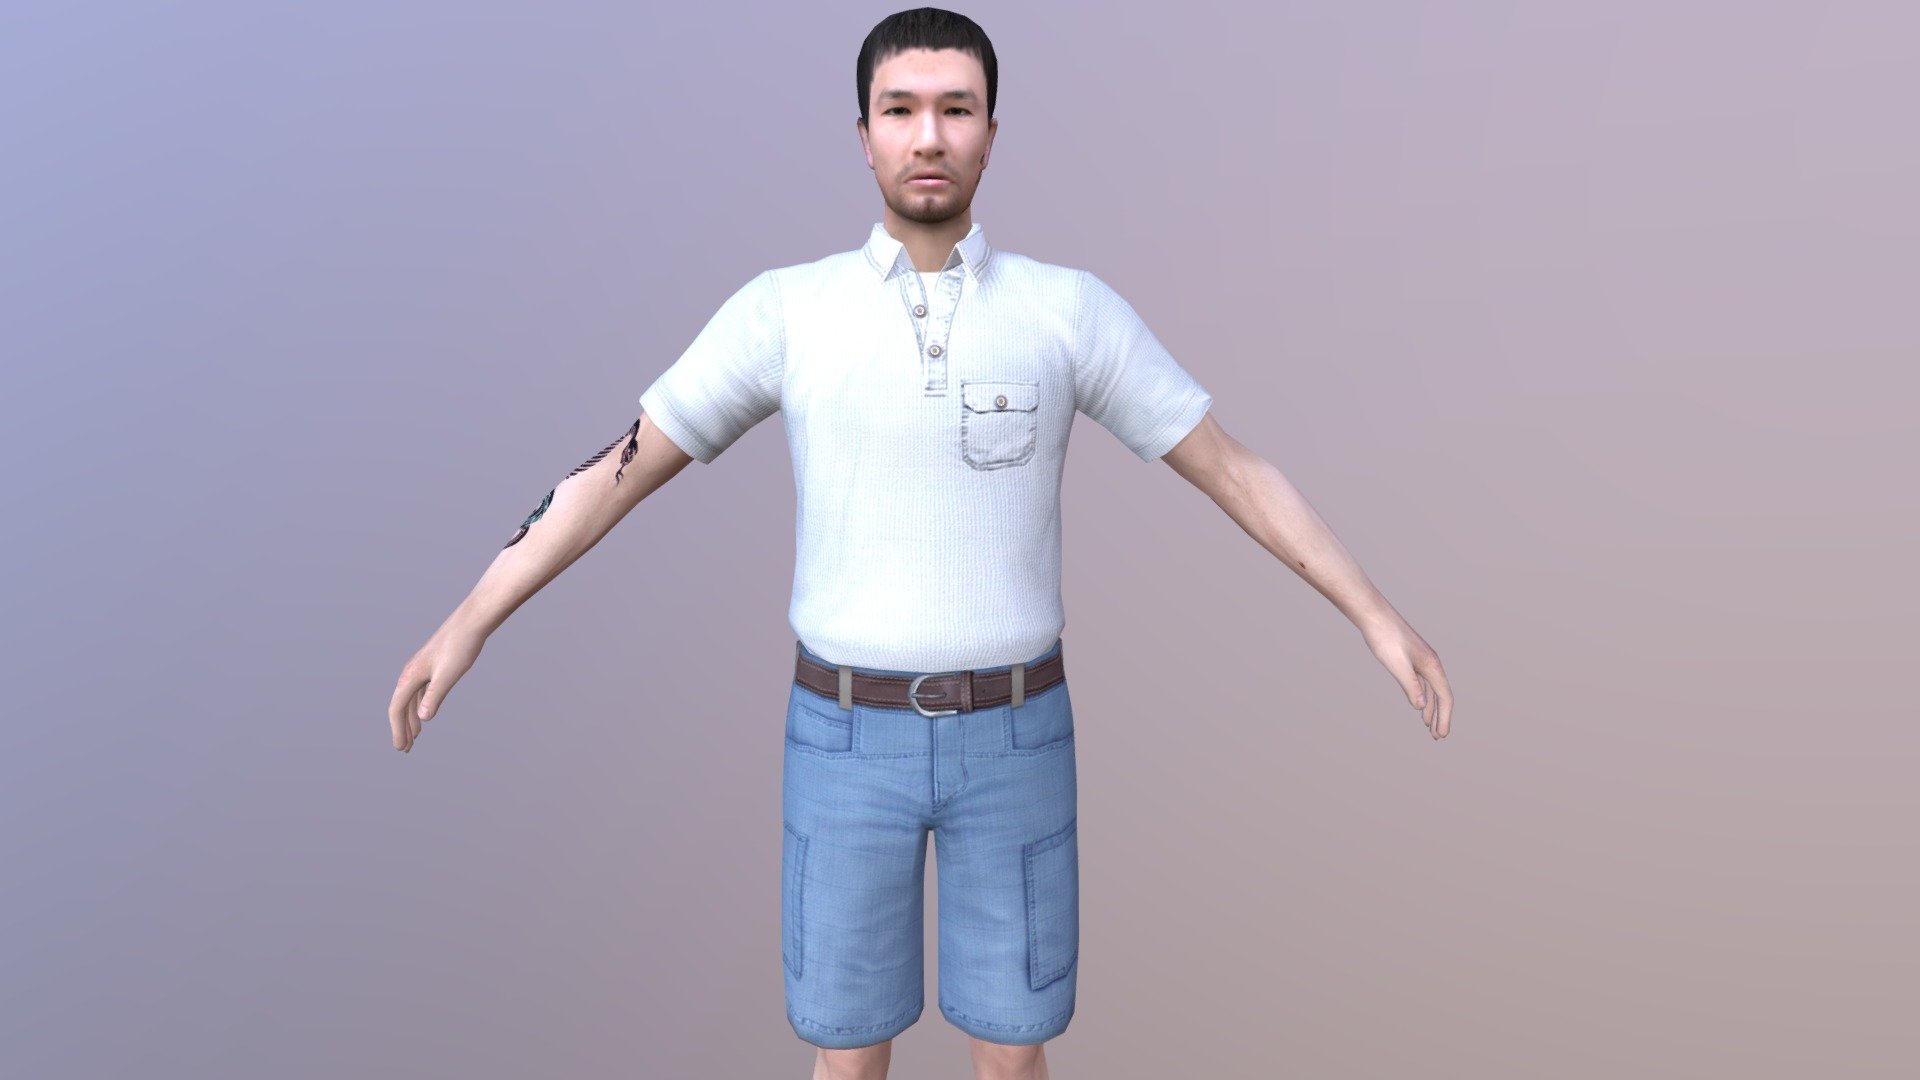 HUMAN CHARACTER WITH 250 ANIMATIONS

PLEASE VISIT MY PROFILE FOR VIEW AND DOWNLOAD MORE LOW POLY AND REALISTIC HIGH POLY CHARACTERS




AVAILABLE FILE FORMATS  :-

3DS MAX (.MAX) - 2017 

MAYA  (.MA ) - 2017

UNITY   (.UNITYPACKAGE)  -2018

CINEMA 4D  (.C4D) - R19

BLENDER  (.BLEND) - 2.9

FBX   (.FBX)  VERSION- 7.4 

OBJ  (.OBJ) 

COLLADA  (.DAE)   

YOU CAN ALSO IMPORT IN &ldquo;UNREAL ENGINE